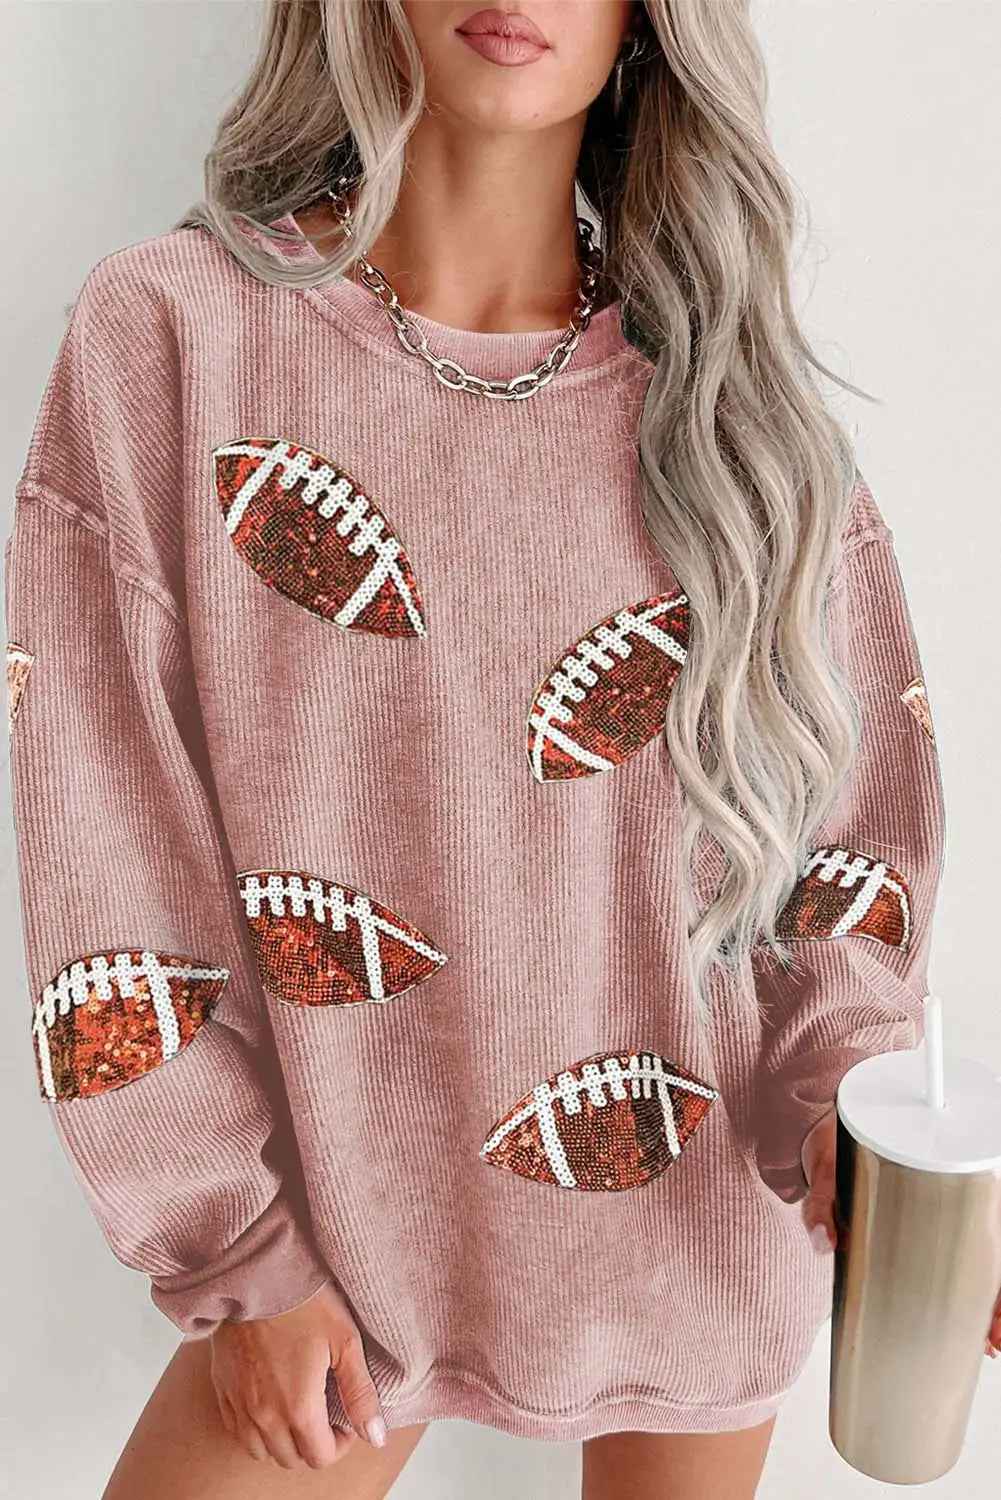 Black sequin fringed rugby casual sweatshirt - graphic